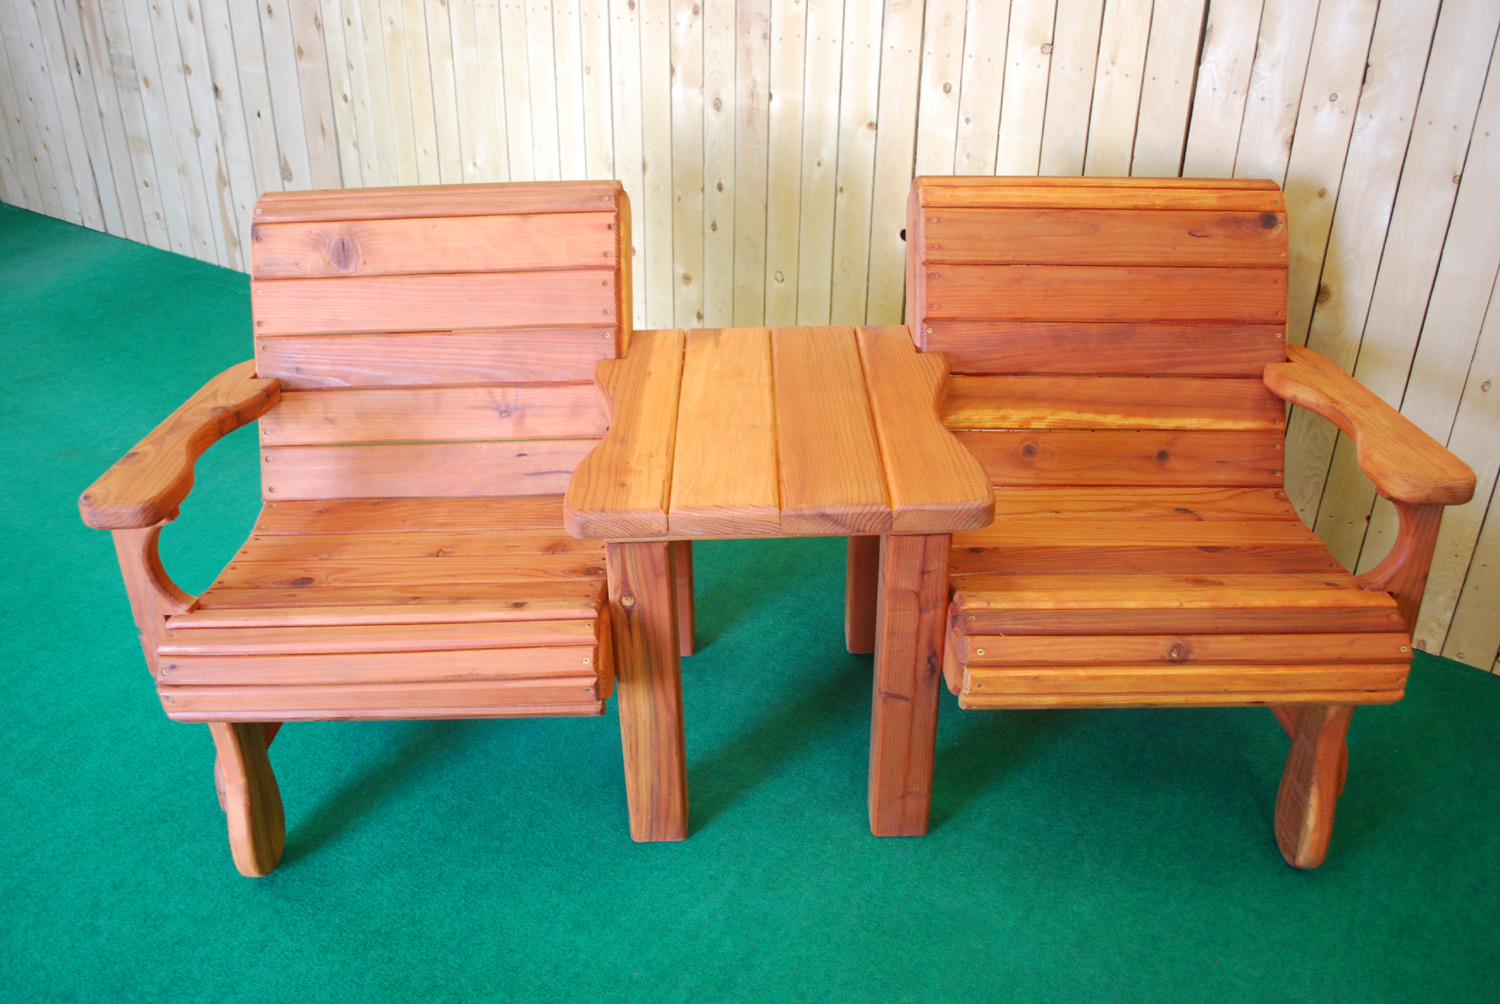 redwood 2 chair and table